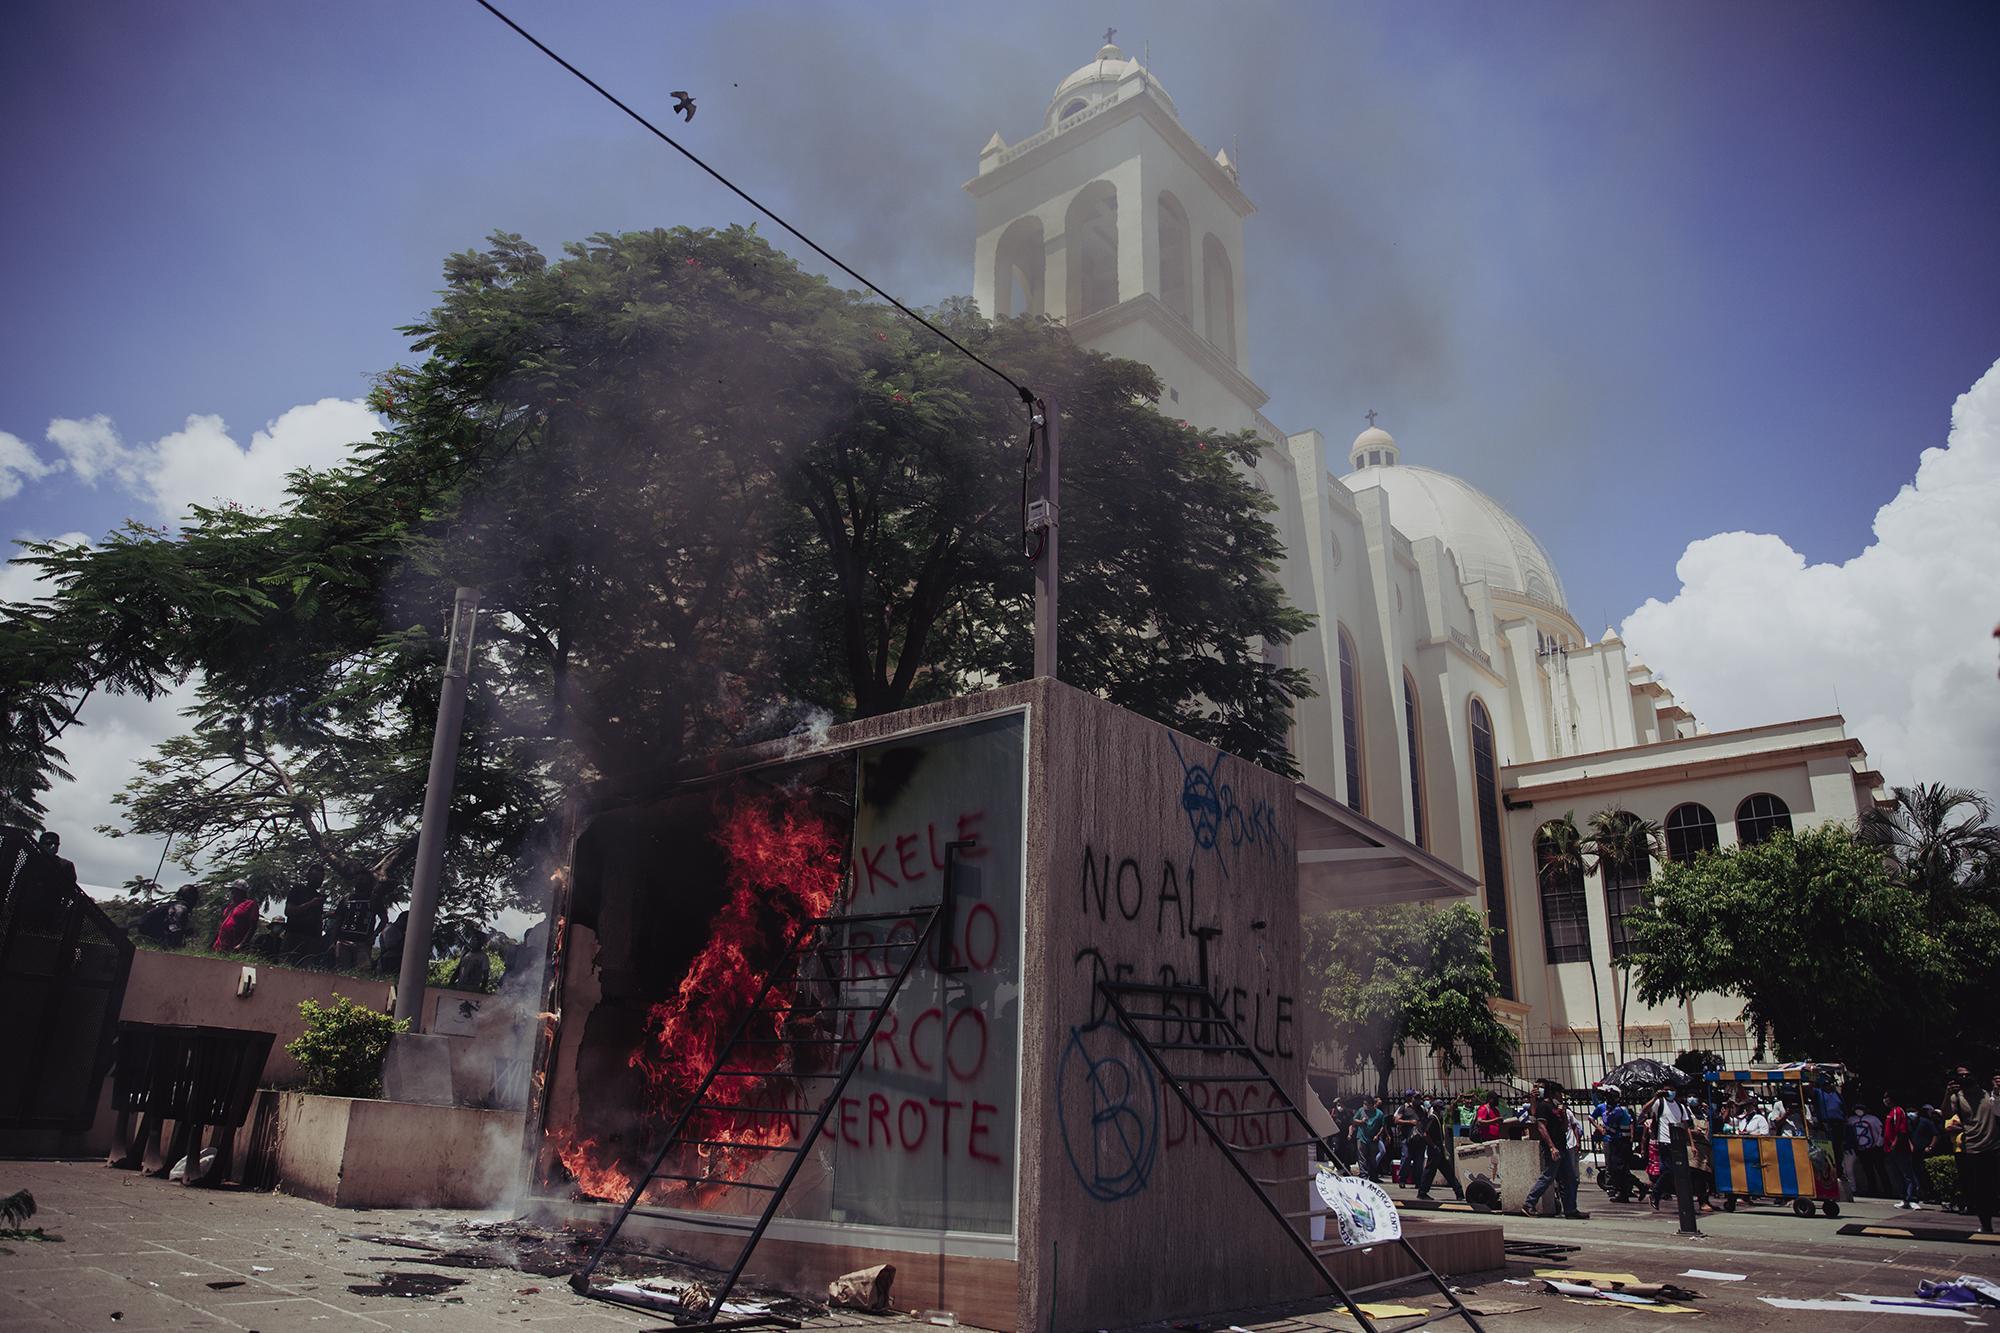 A small group of protestors set the Chivo ATM in Gerardo Barrios Plaza on fire during mass anti-government protests in San Salvador on September 15, Bicentennial Independence Day. Photo: Carlos Barrera/El Faro